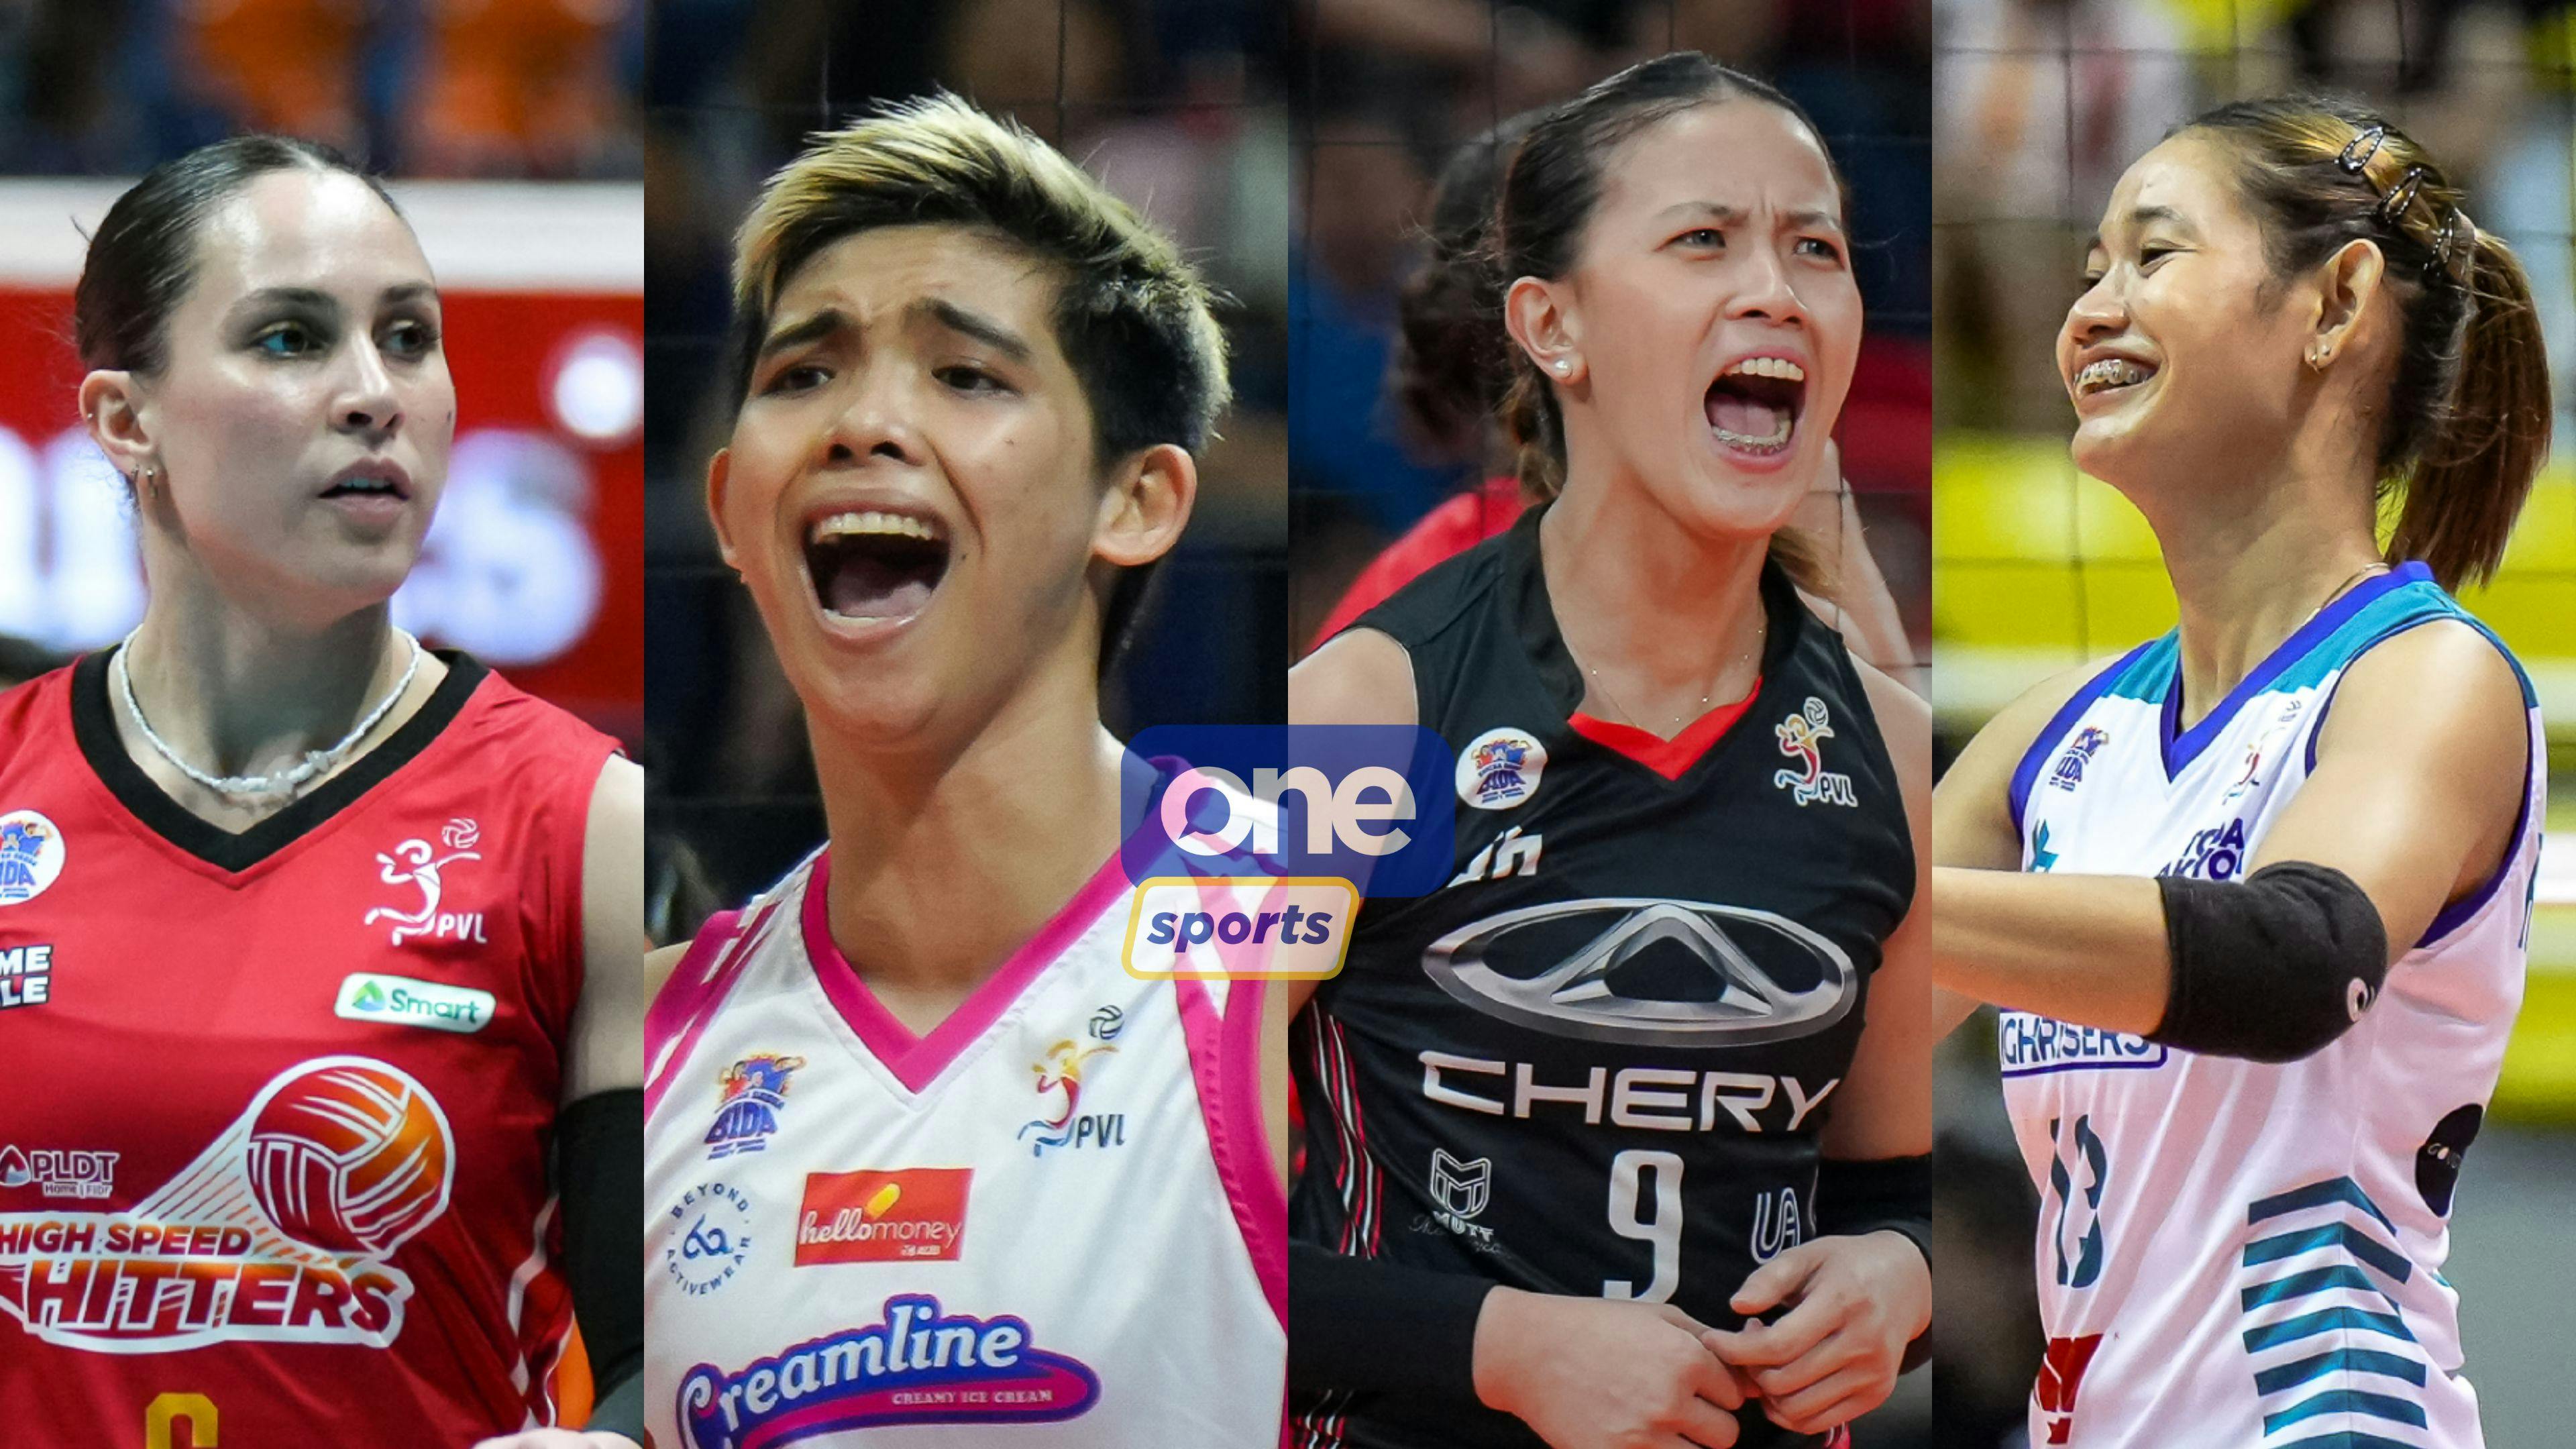 PVL schedule: PLDT takes on Creamline, Chery Tiggo faces Galeries Tower as last semis ticket hangs in the balance